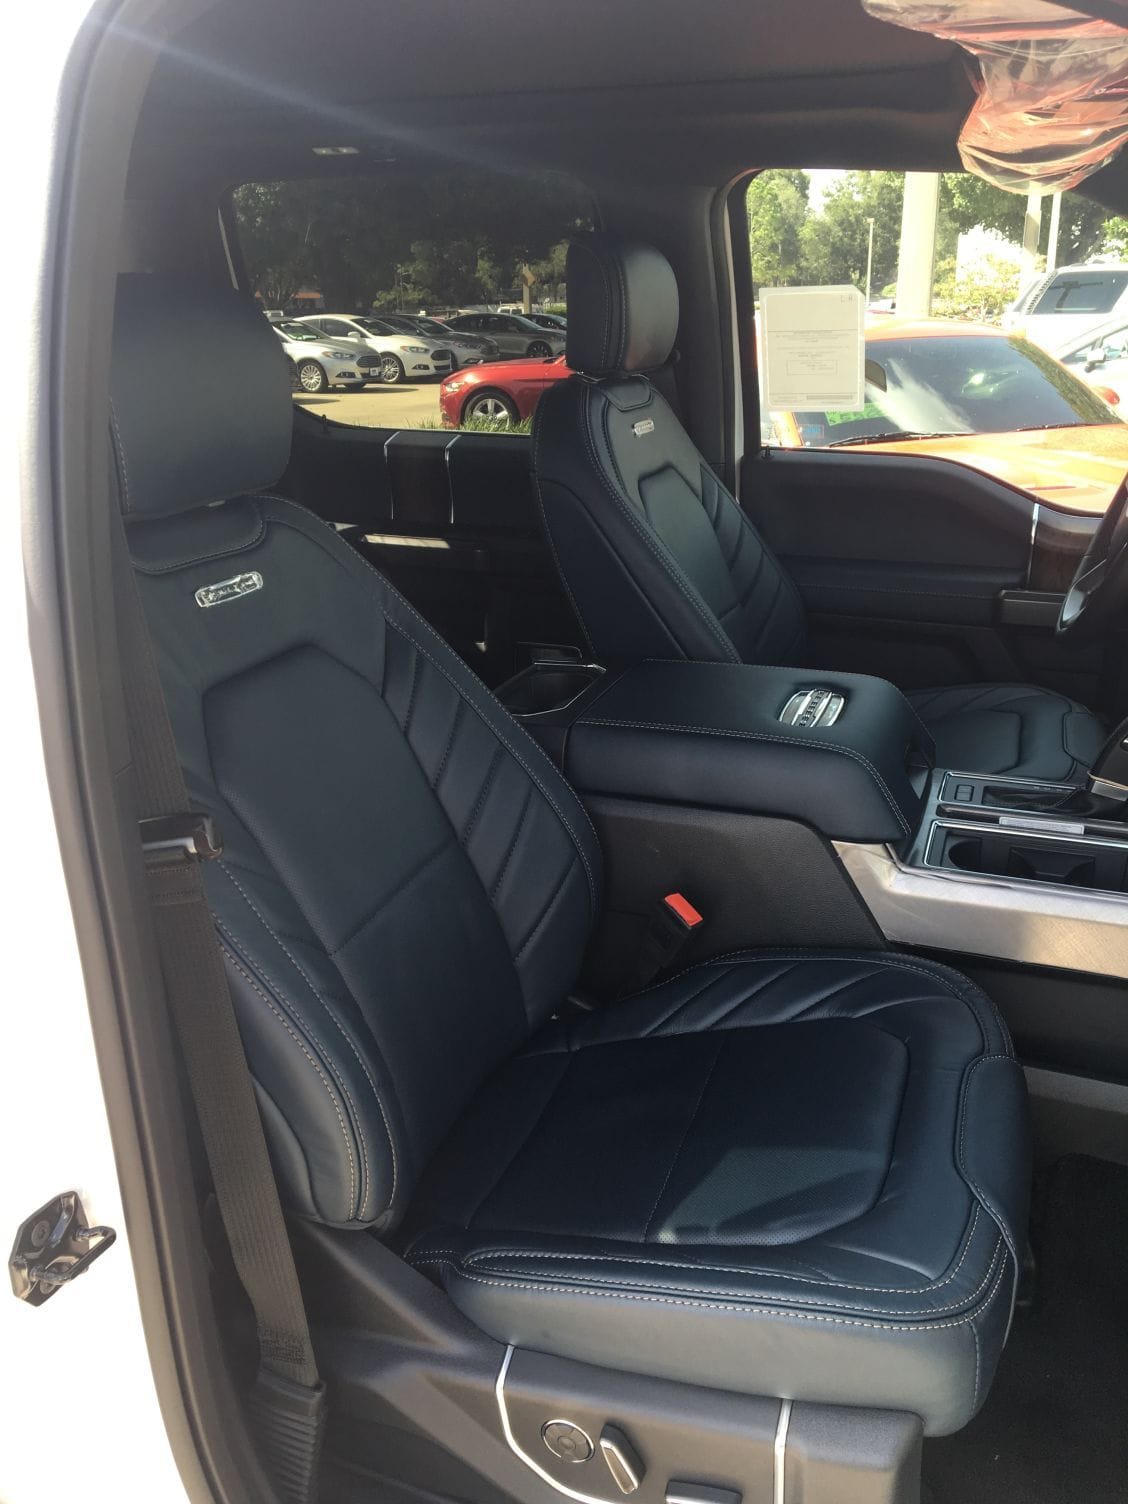 Interior Color - Ford F150 Forum - Community of Ford Truck Fans